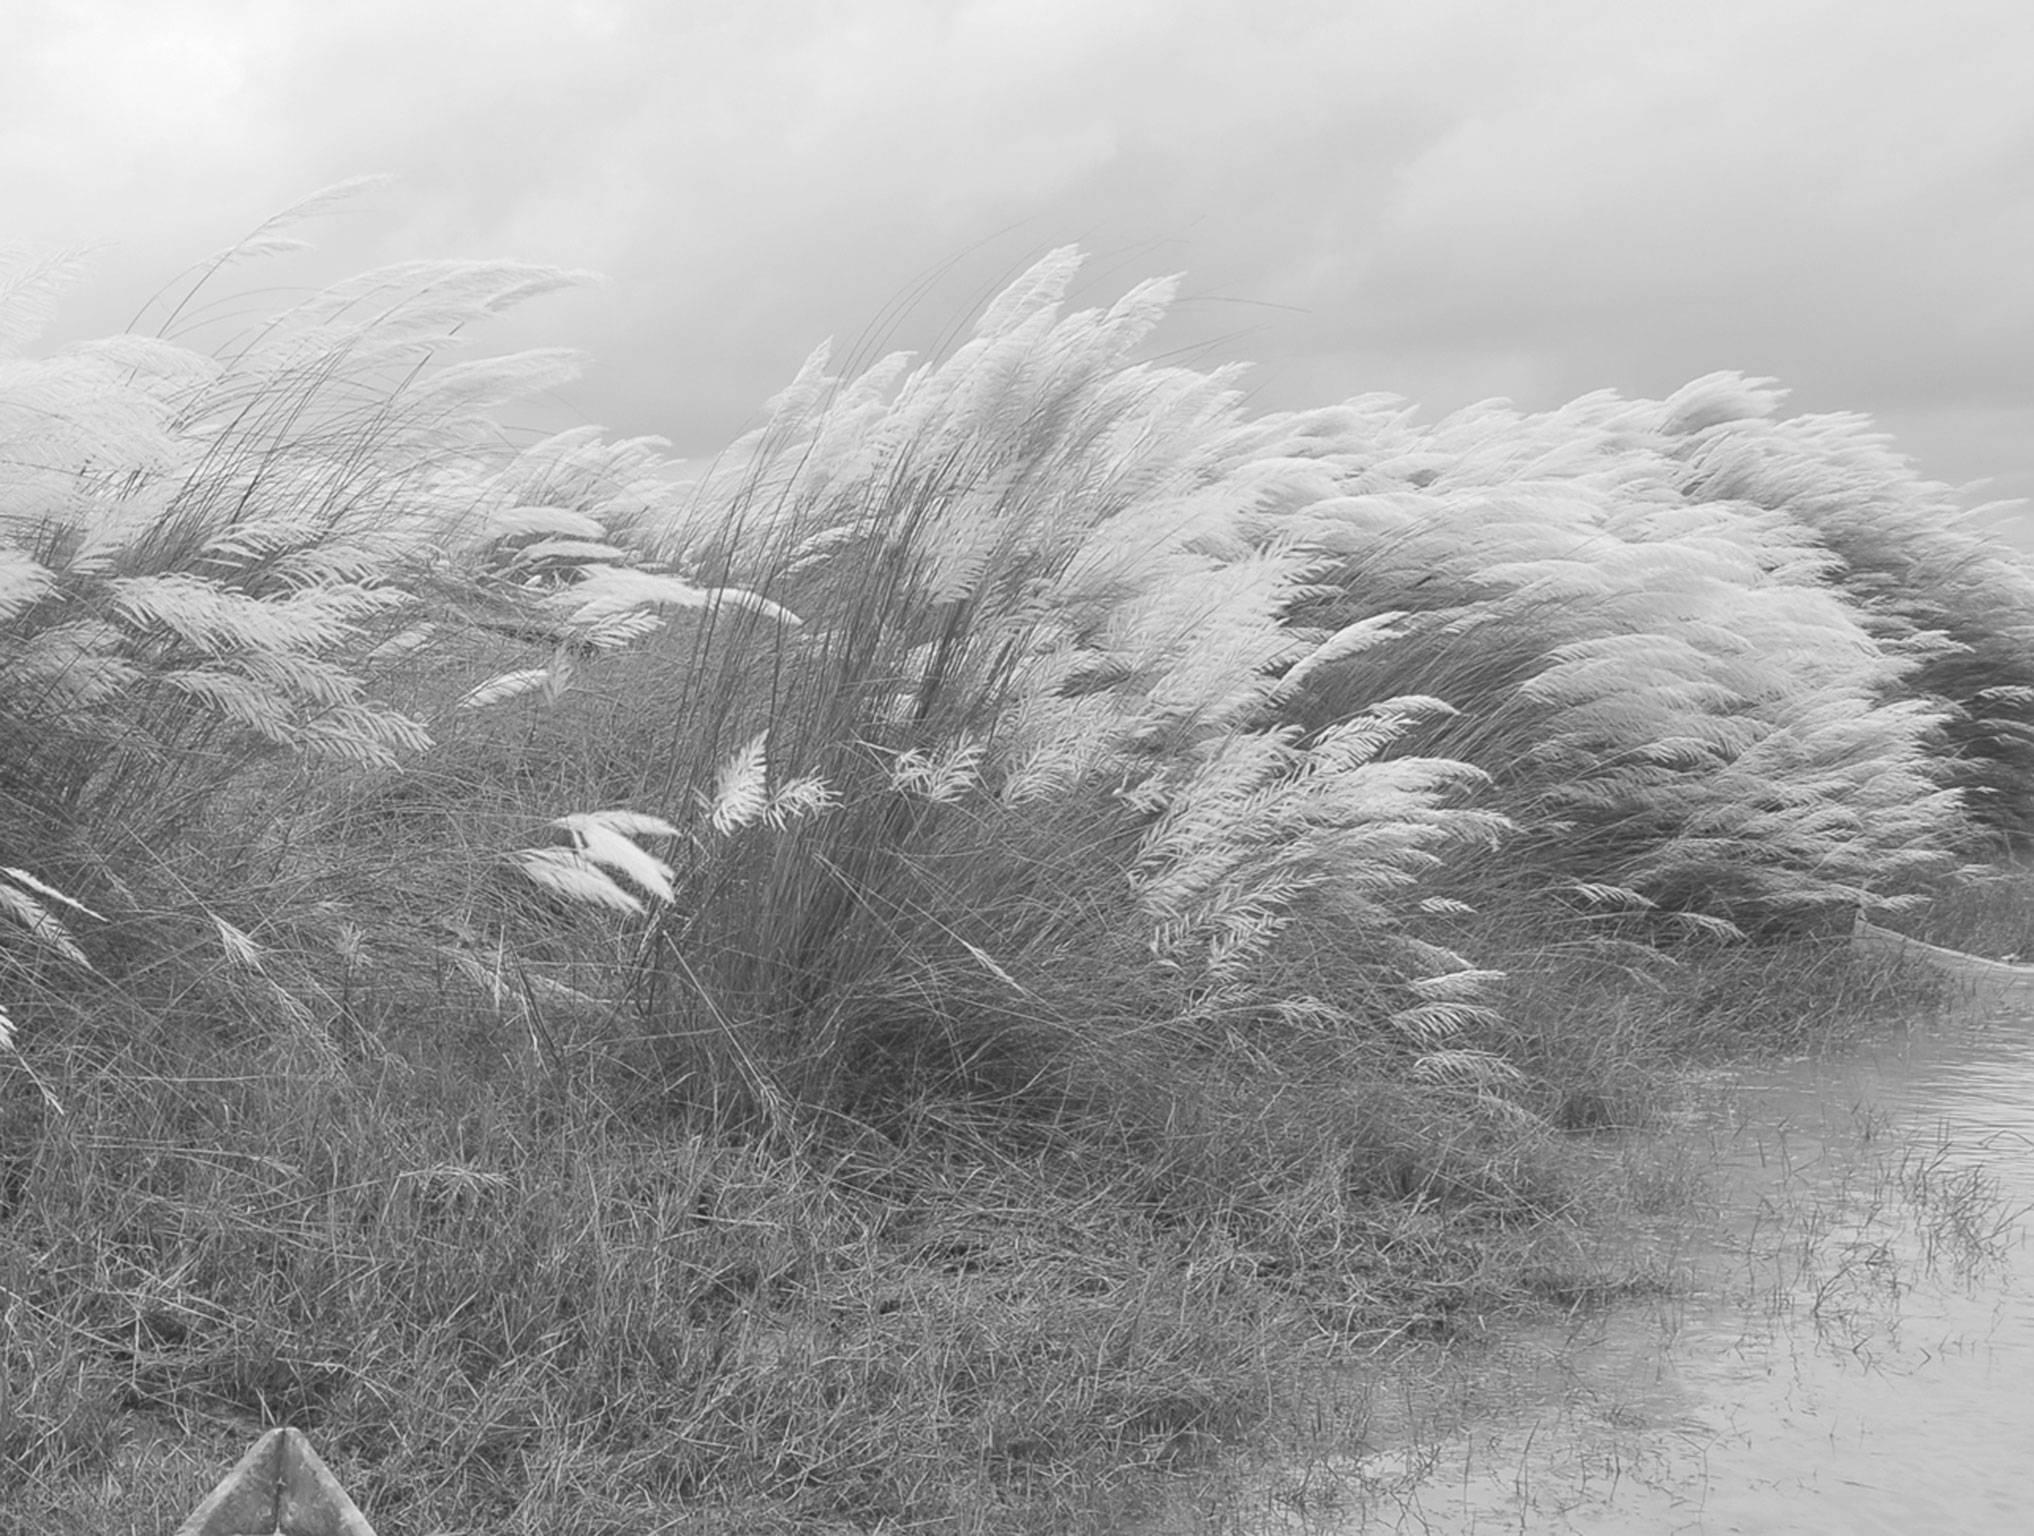 Rural Scenery, Kans Grass, Boat, Bicycle, Black & White Photography 